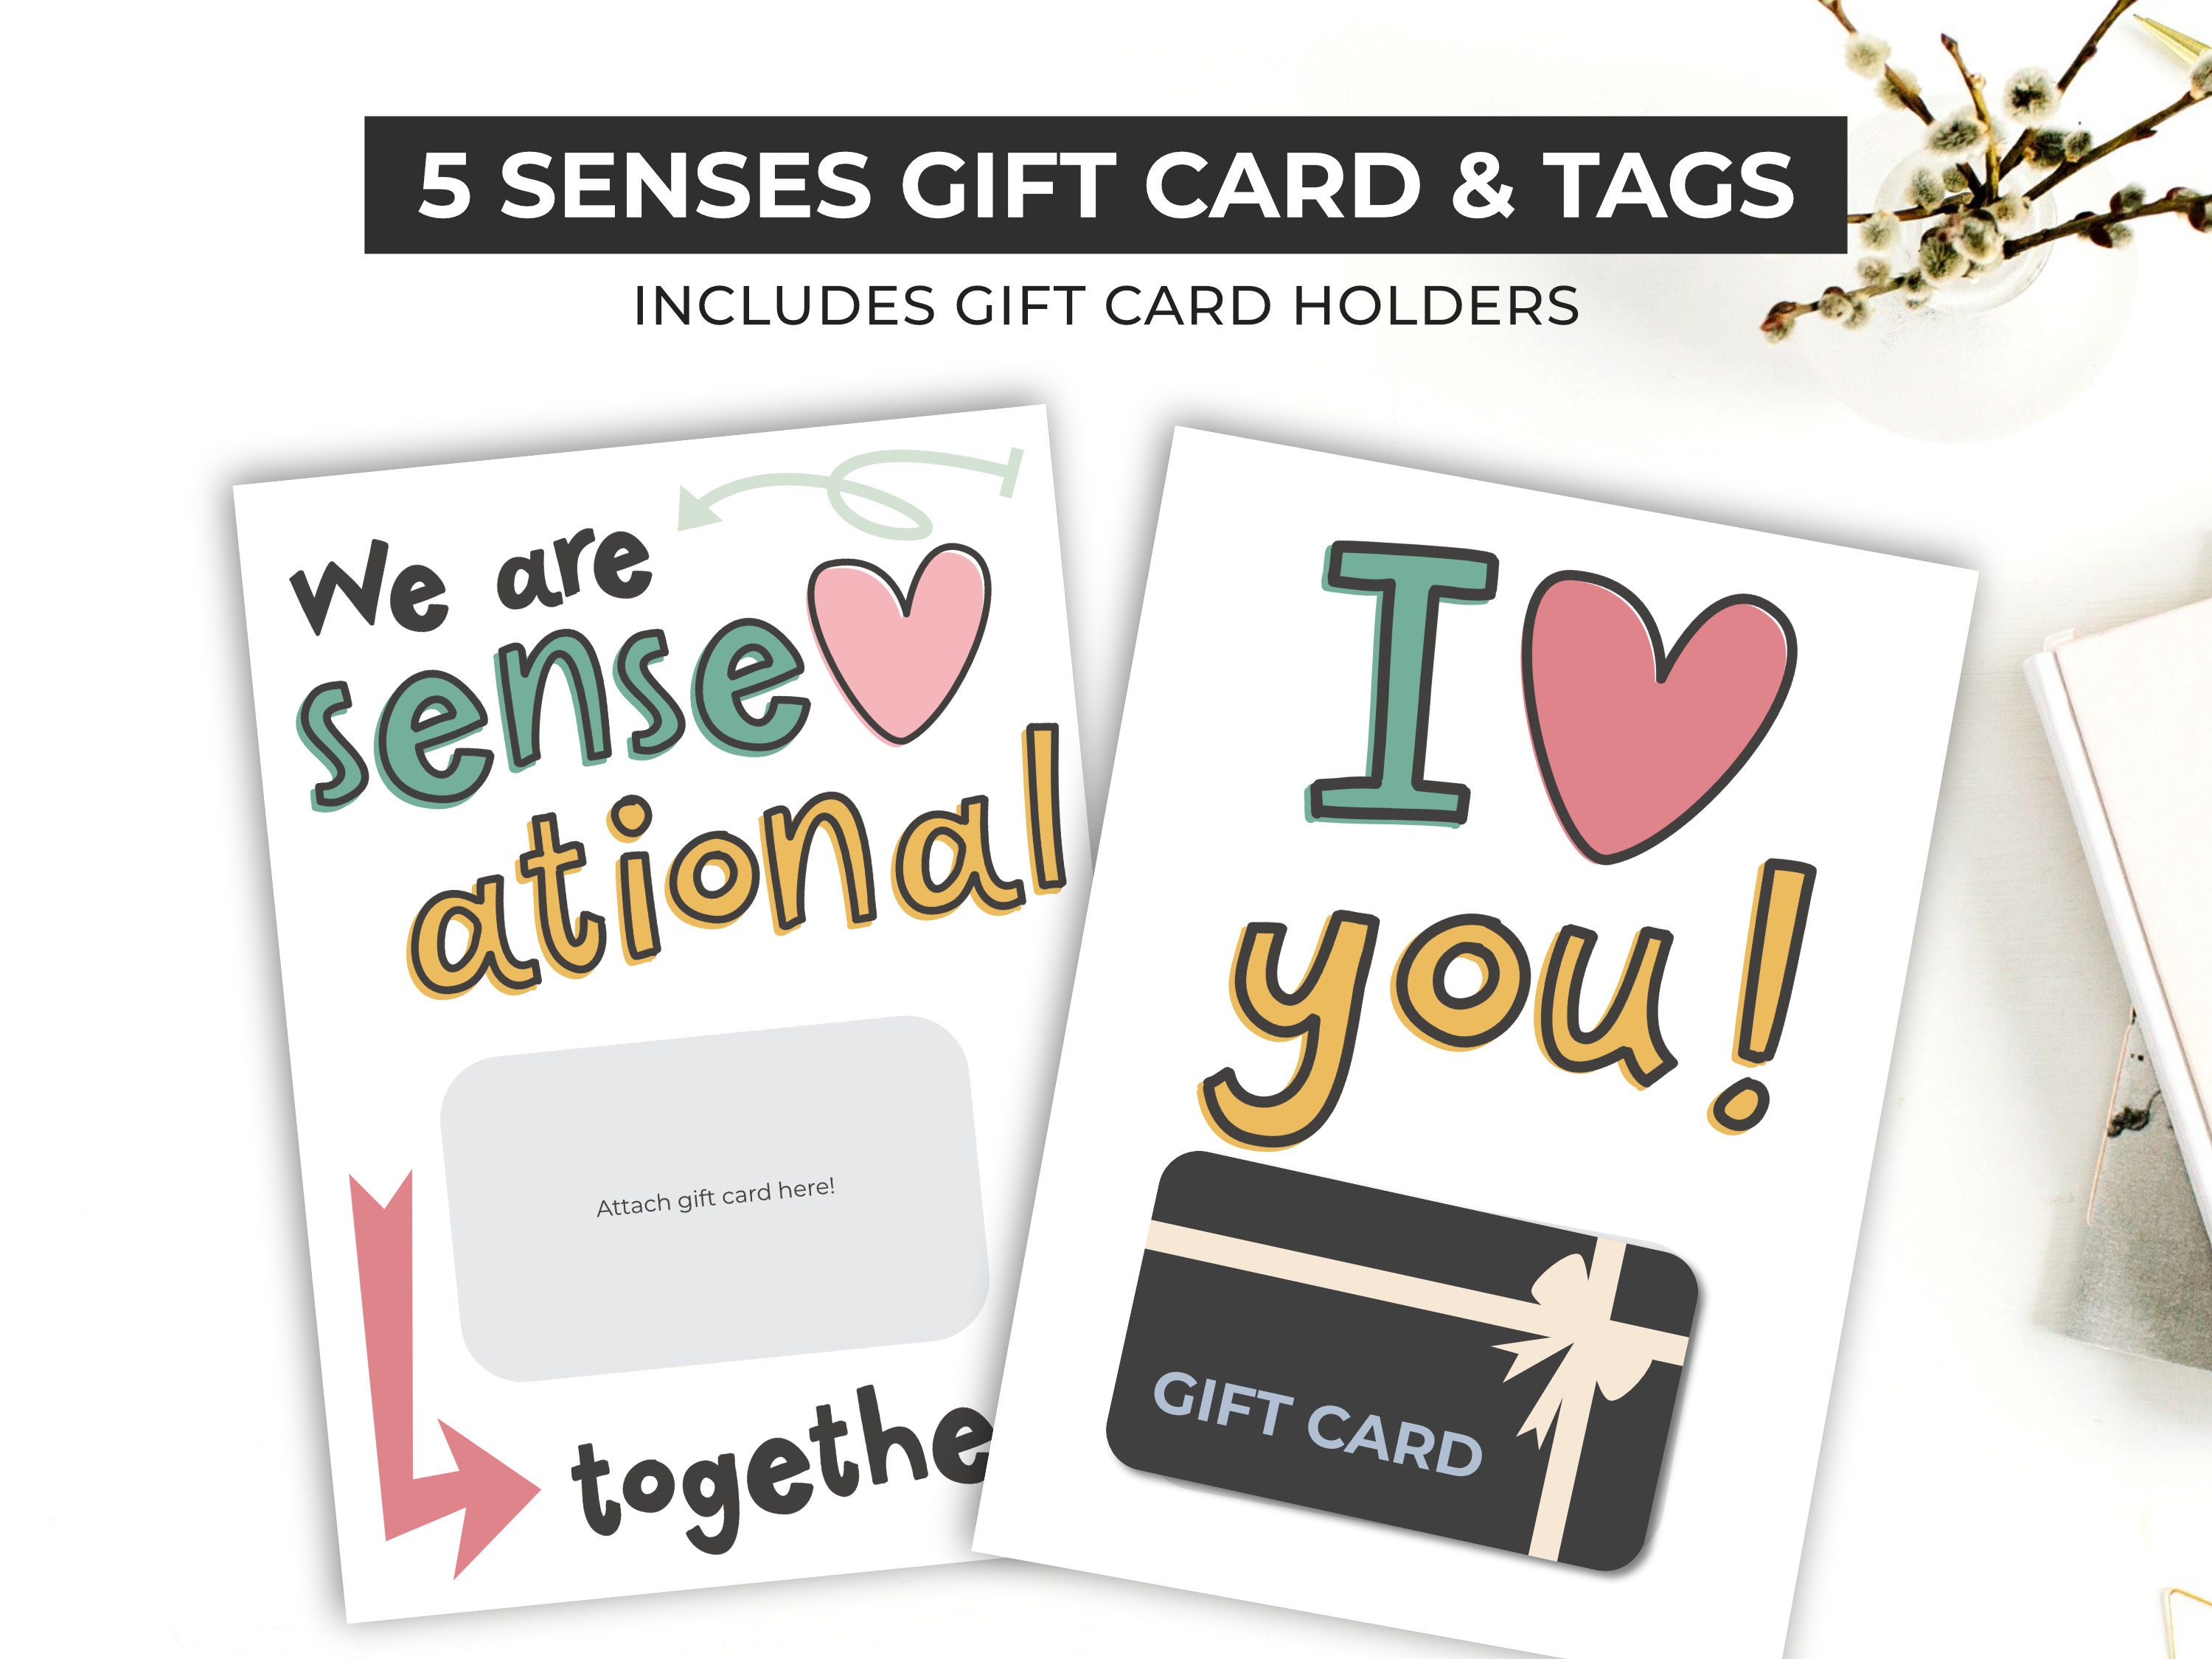 Five Senses Gift Tags and Card flat vector - Stock Illustration